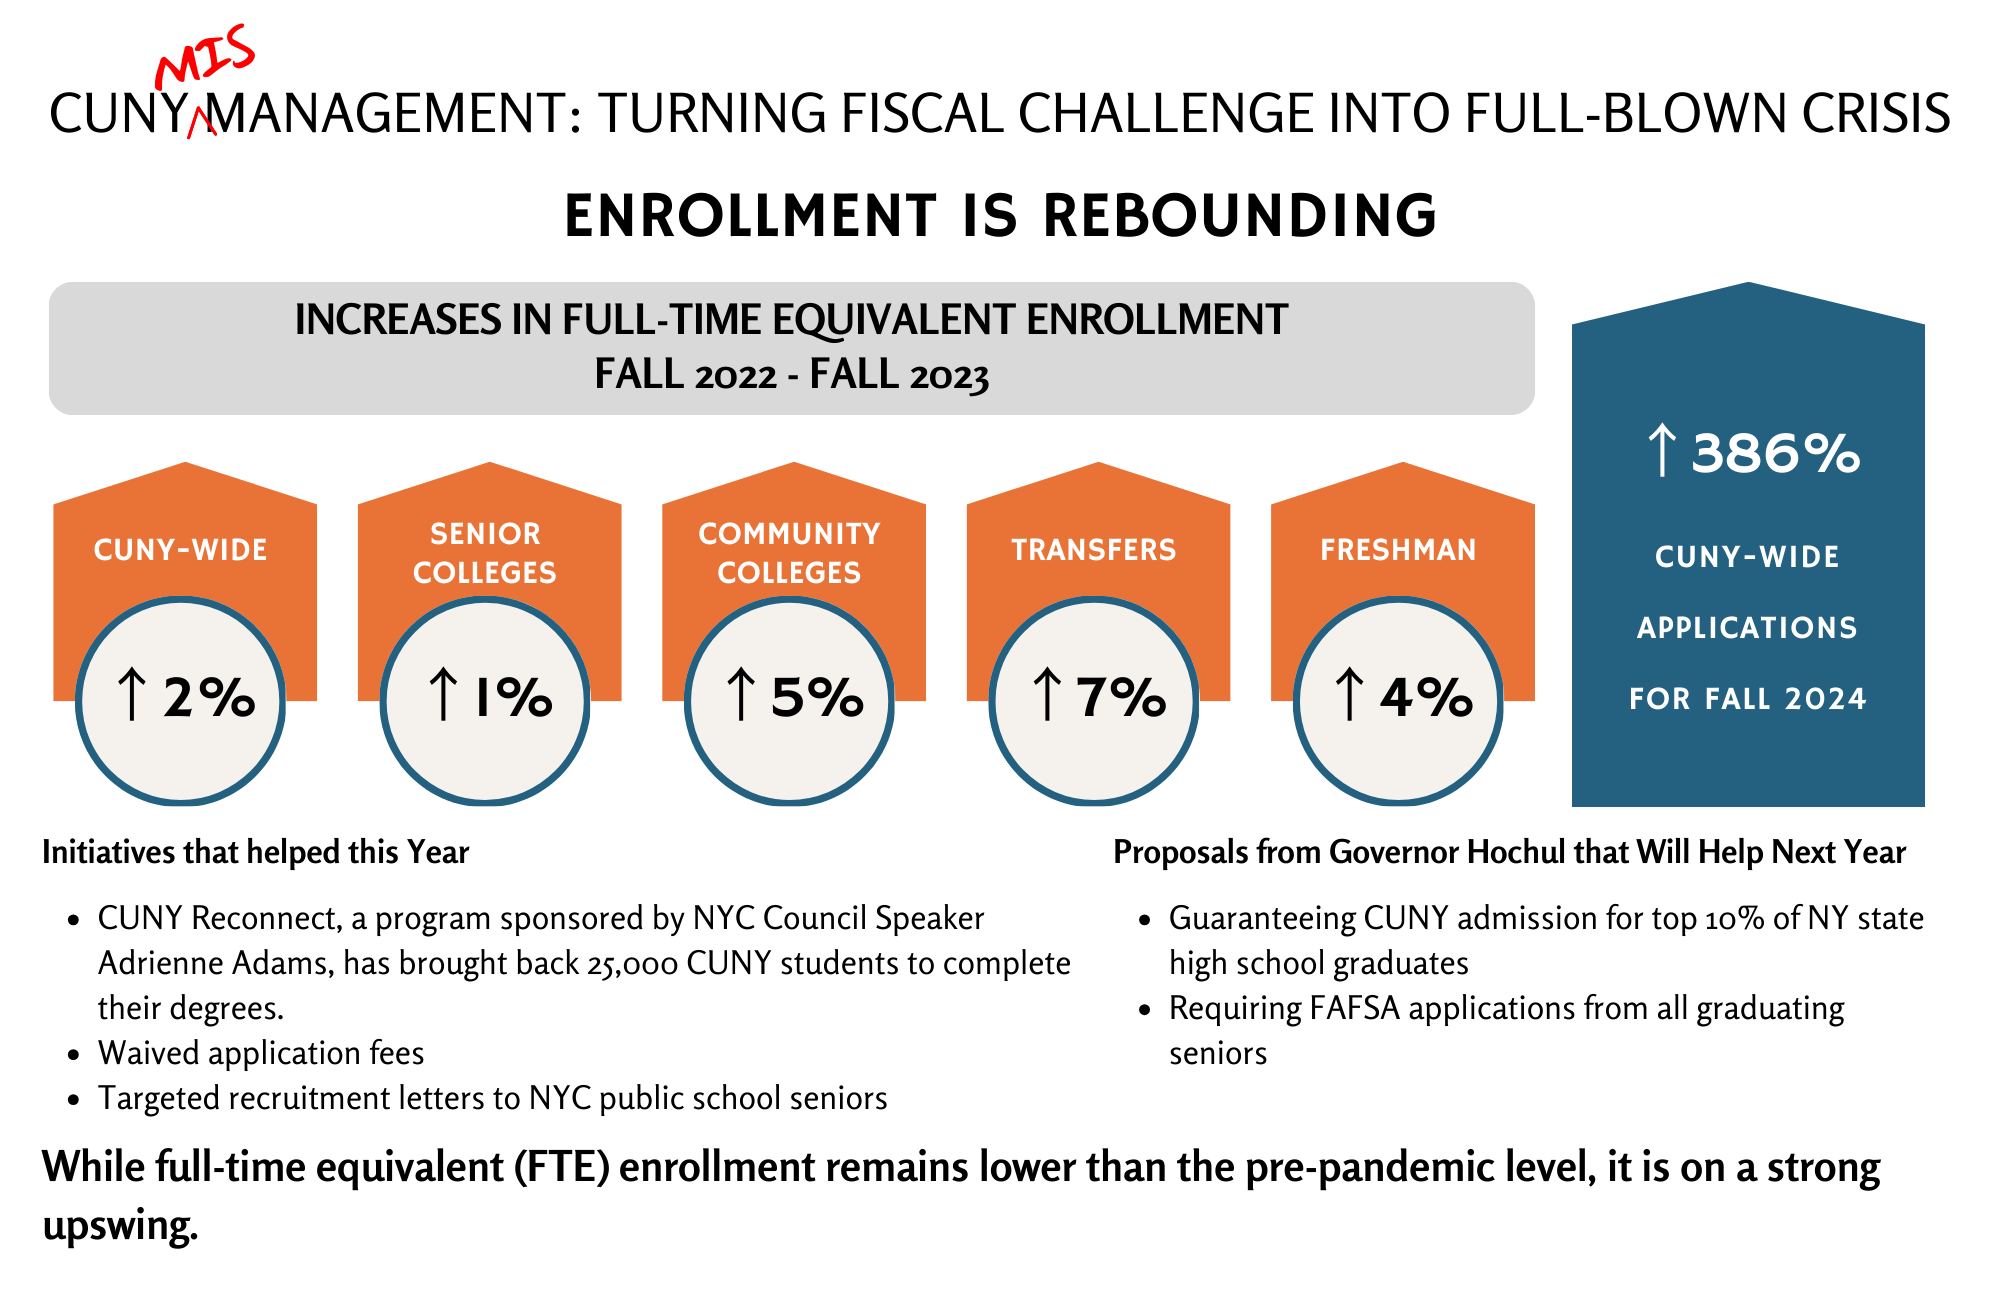 While full-time equivalent (FTE) enrollment remains lower than the pre-pandemic level, it is on a strong upswing.